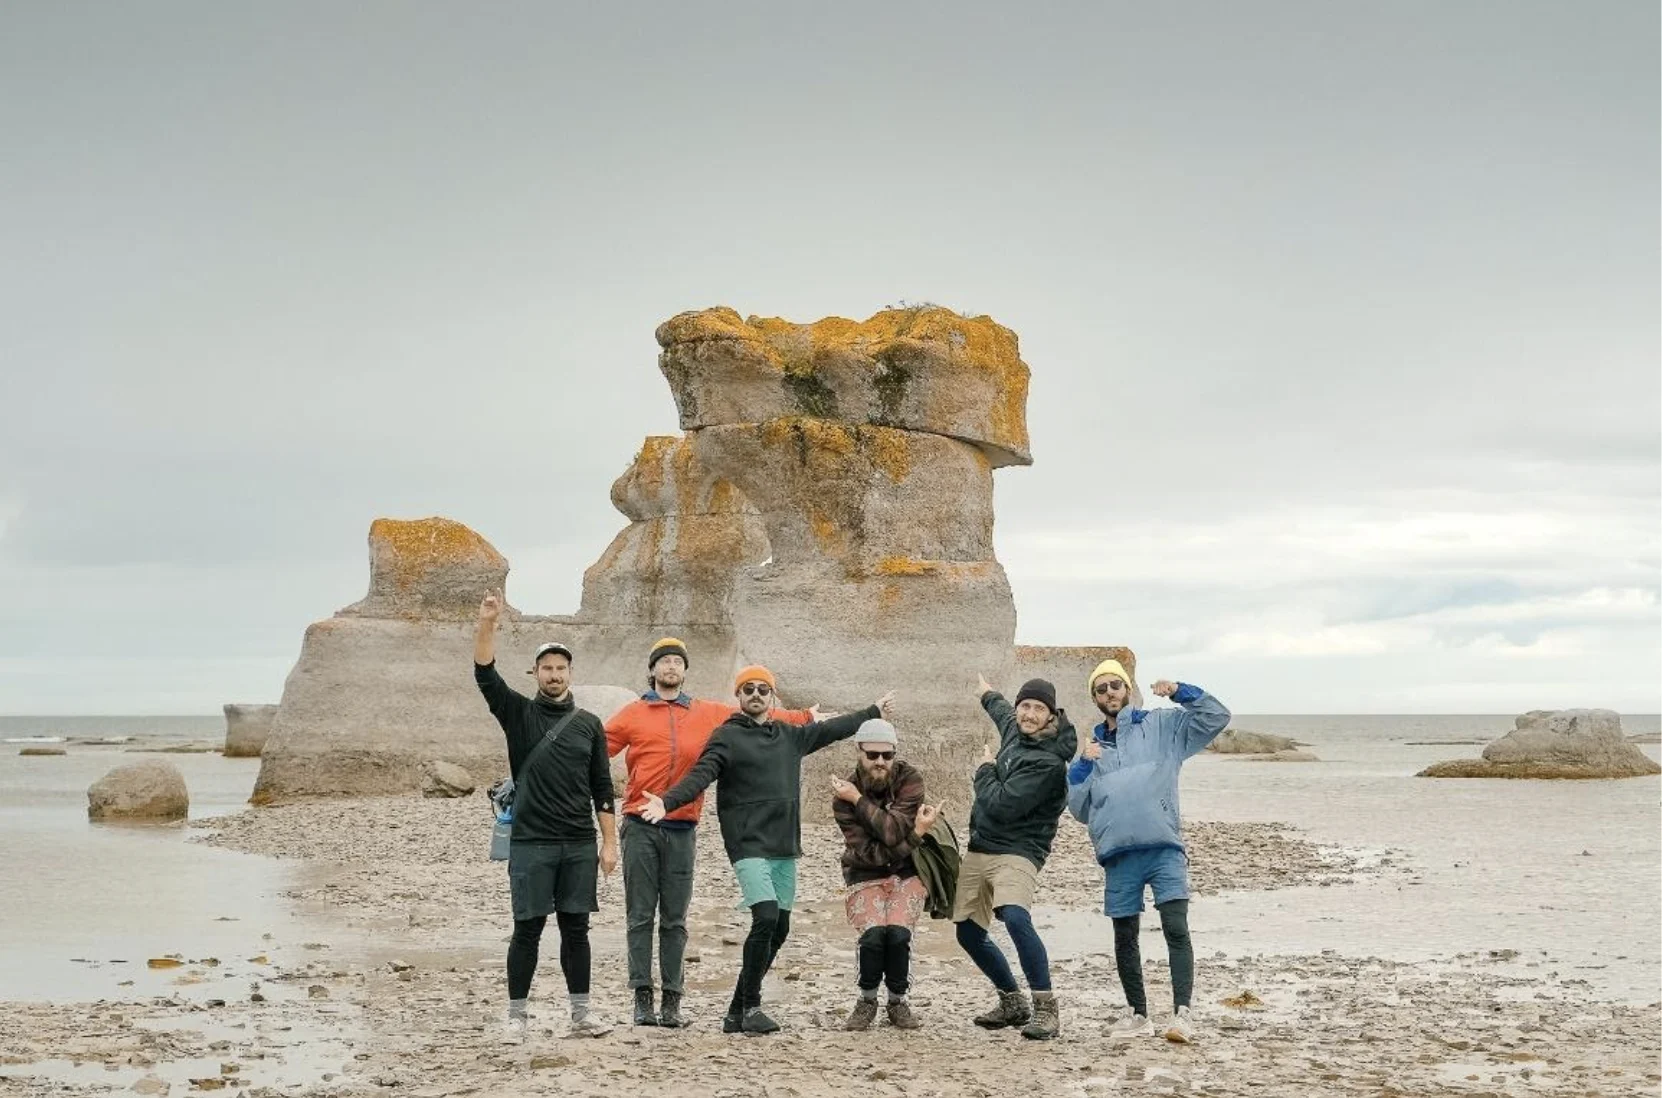 Members of Qualité Motel posing in front of a large rock on a beach